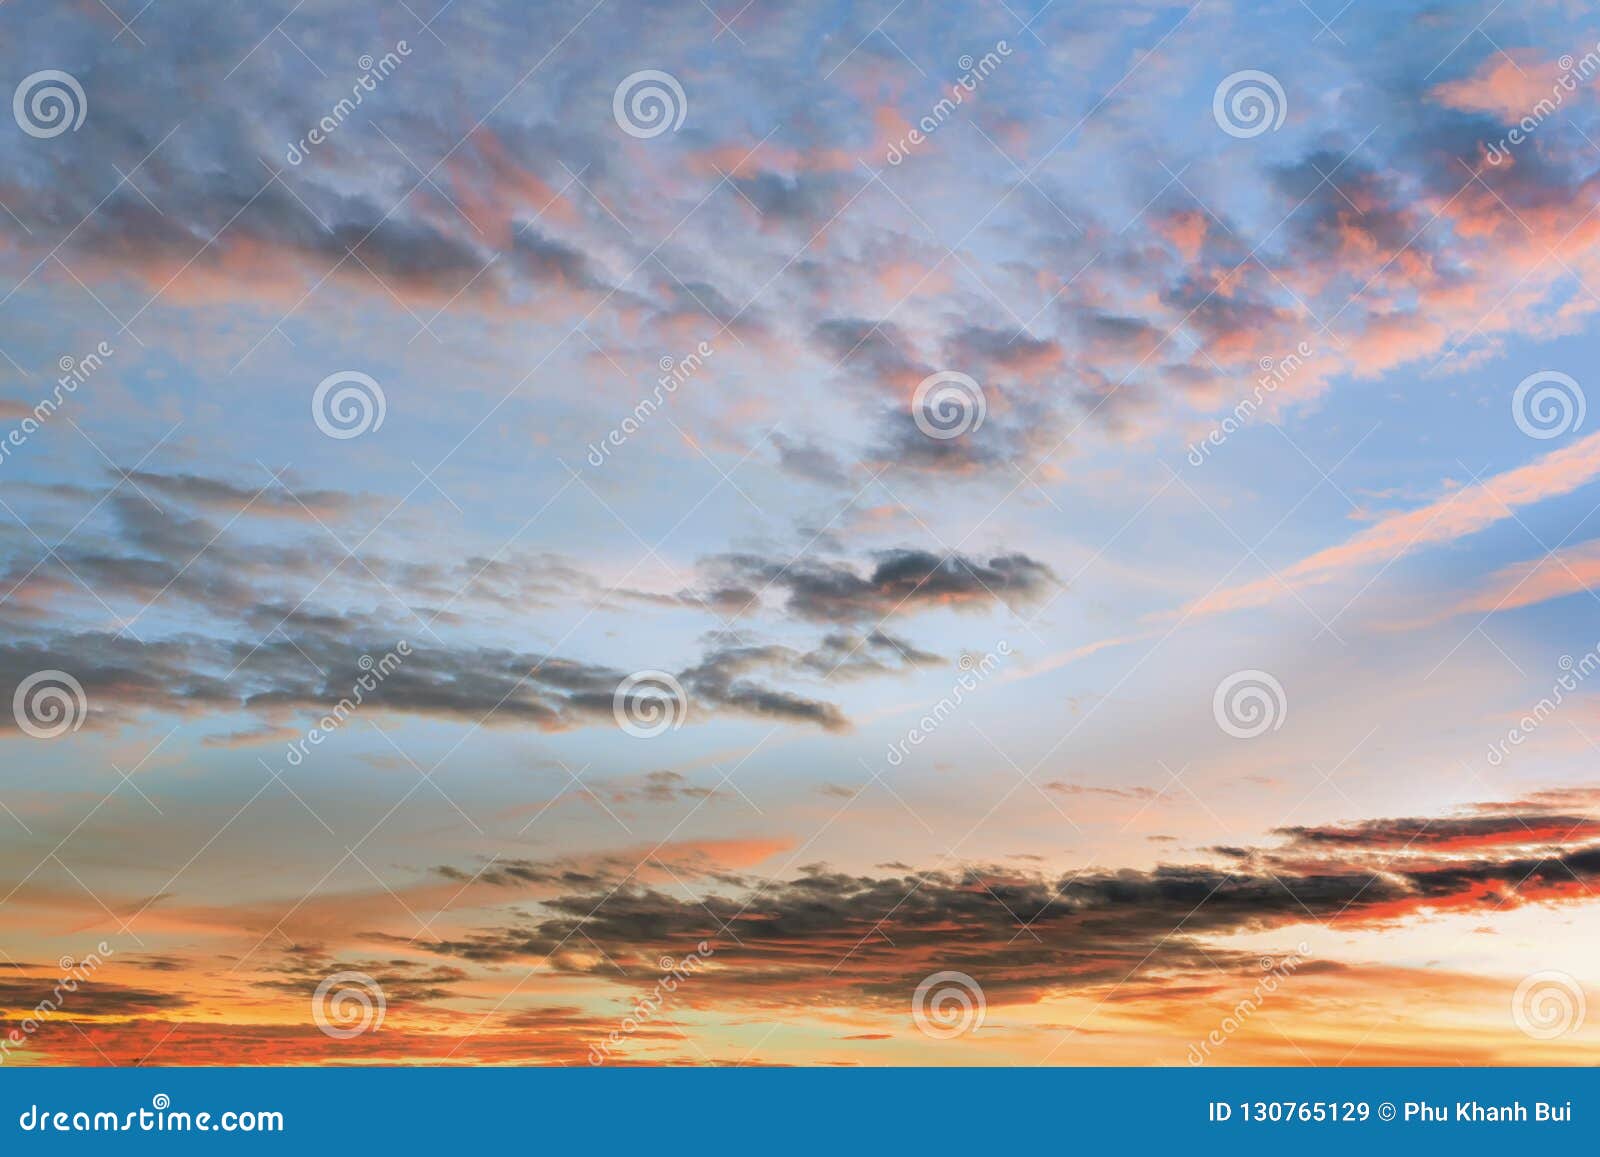 Background with Magic of the Sky and Clouds at Dawn Part 10 Stock Image -  Image of cover, colors: 130765129